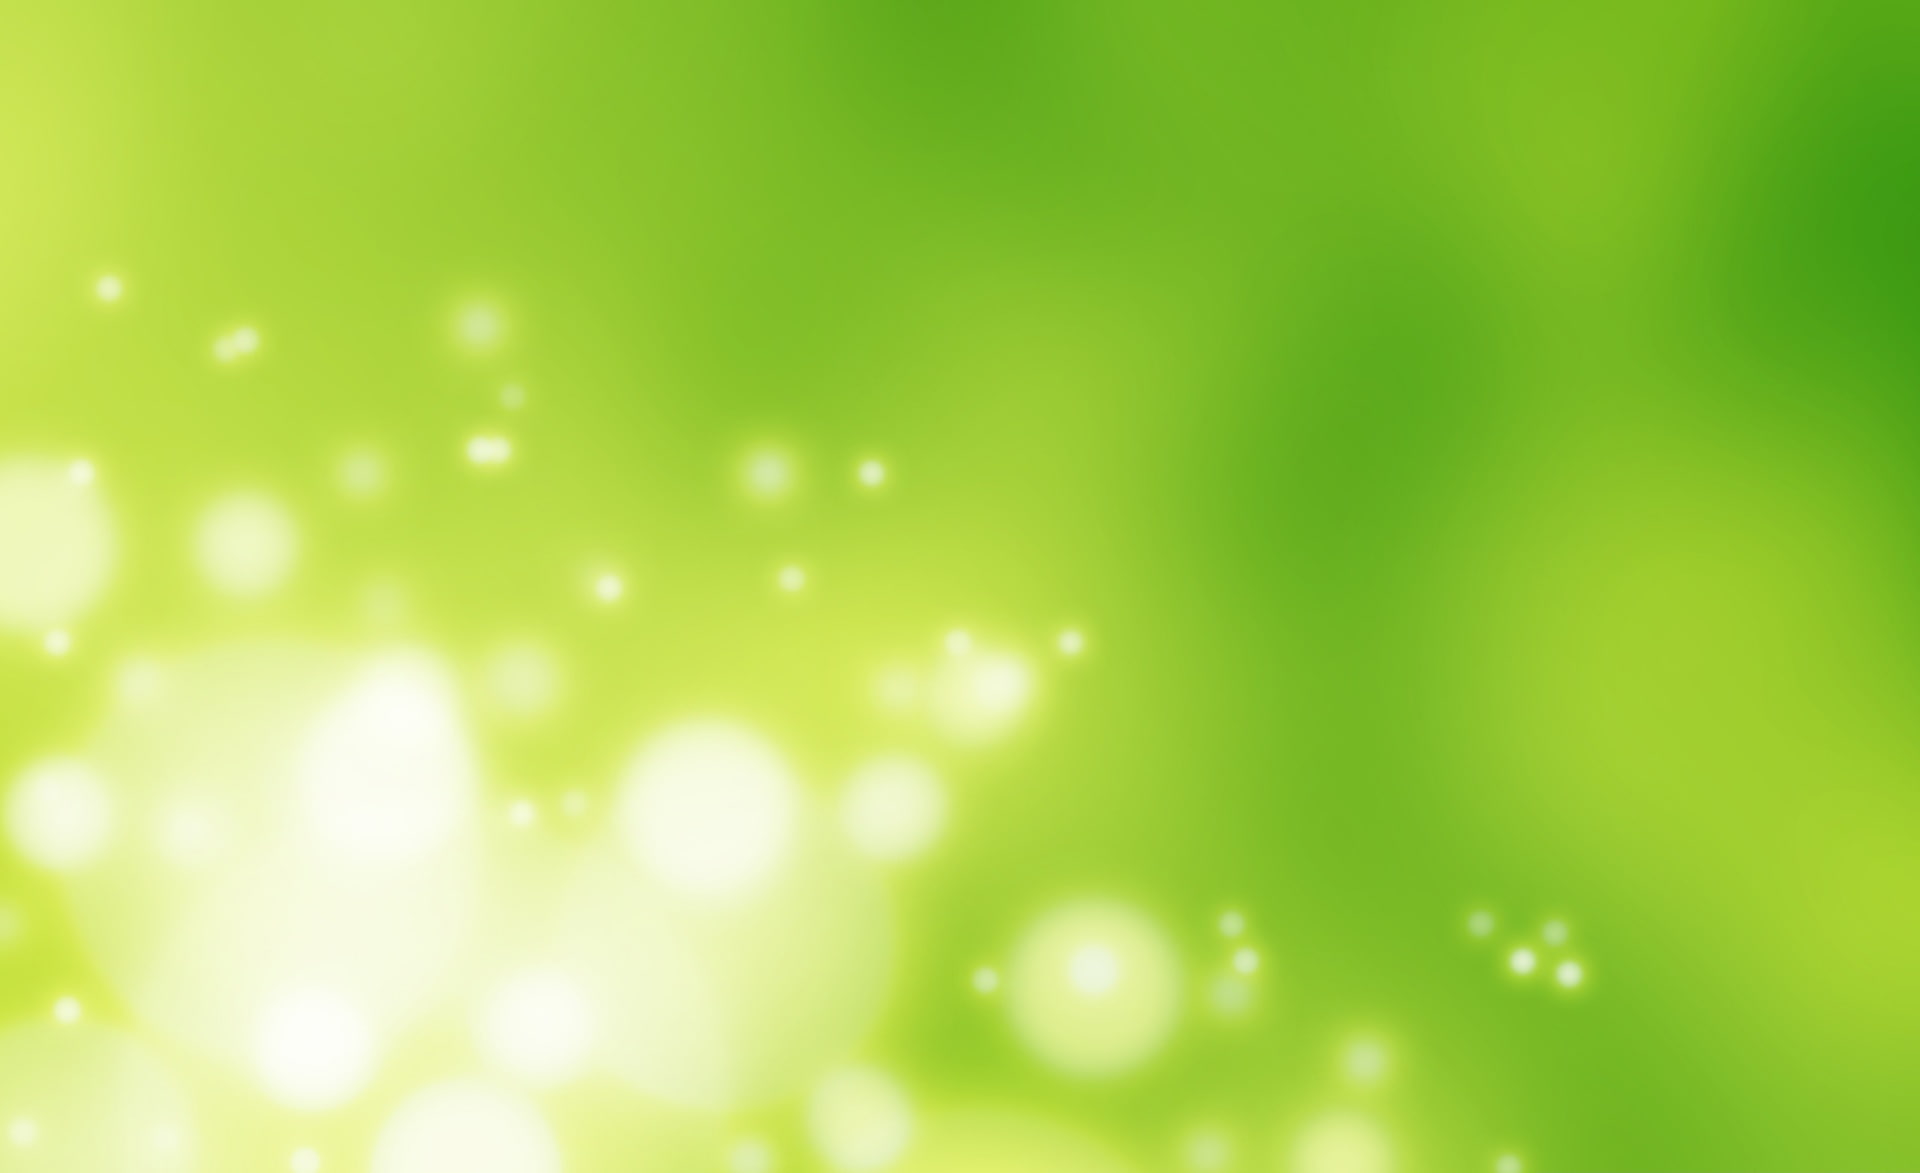 Green Lime Dust, Aero, Colorful, backgrounds, bright, green color